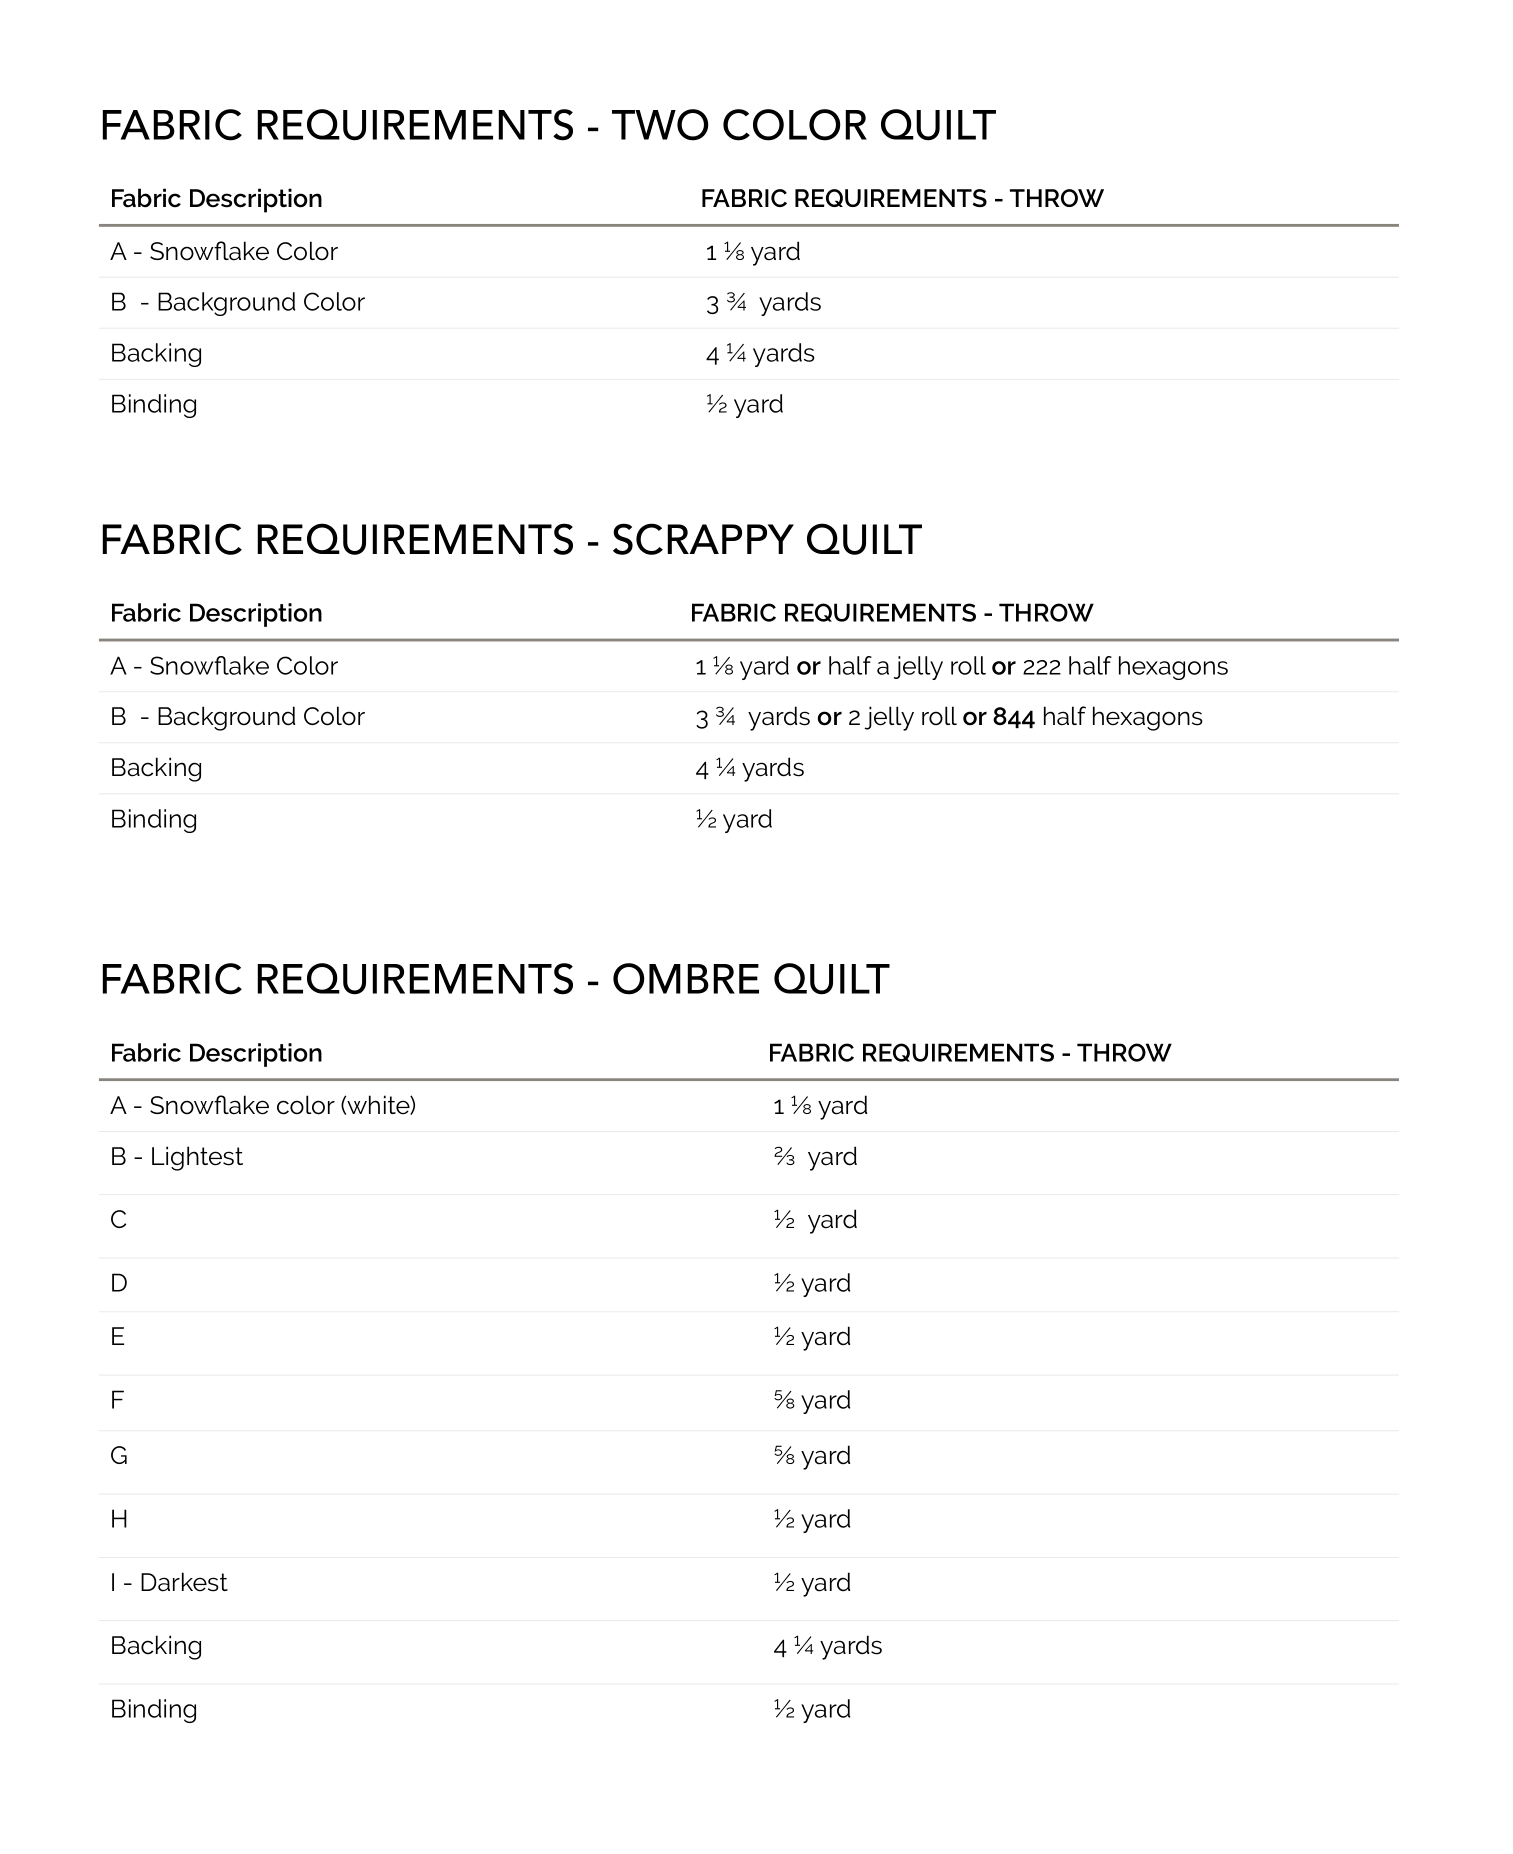 Fabric Requirements for Whimsical Snowflake Quilt Pattern.